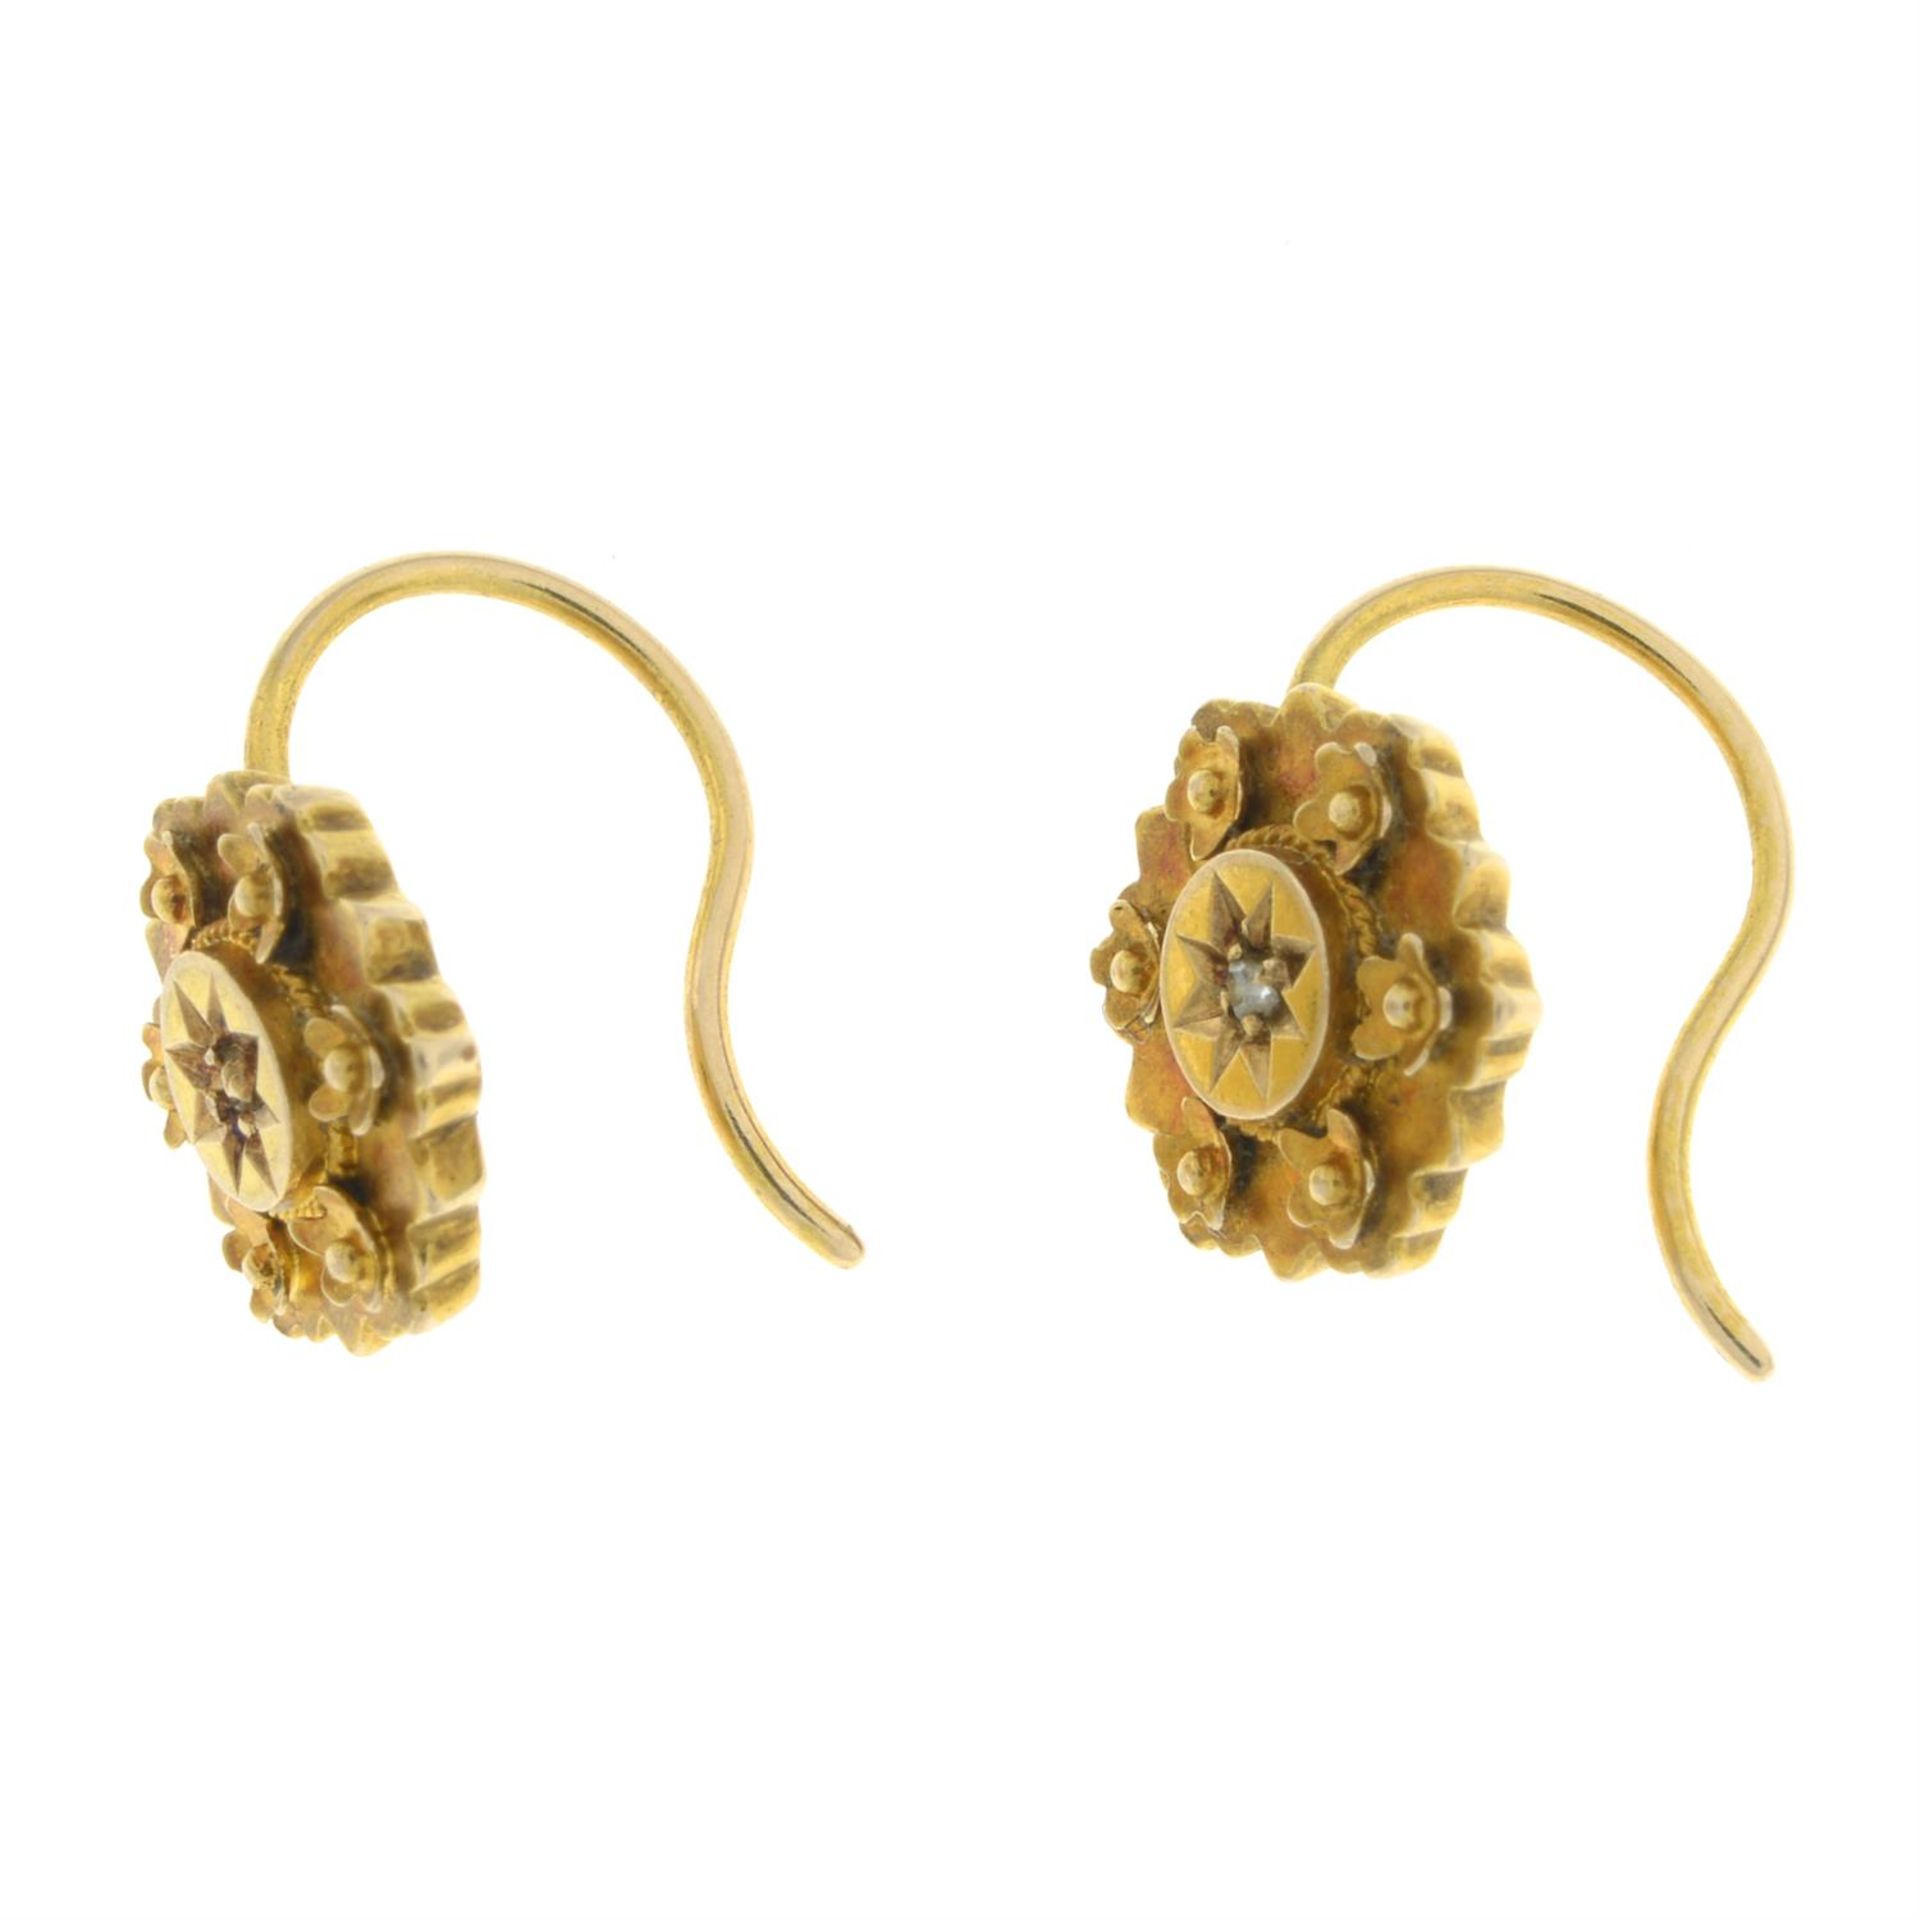 Victorian 15ct gold diamond earrings - Image 3 of 3